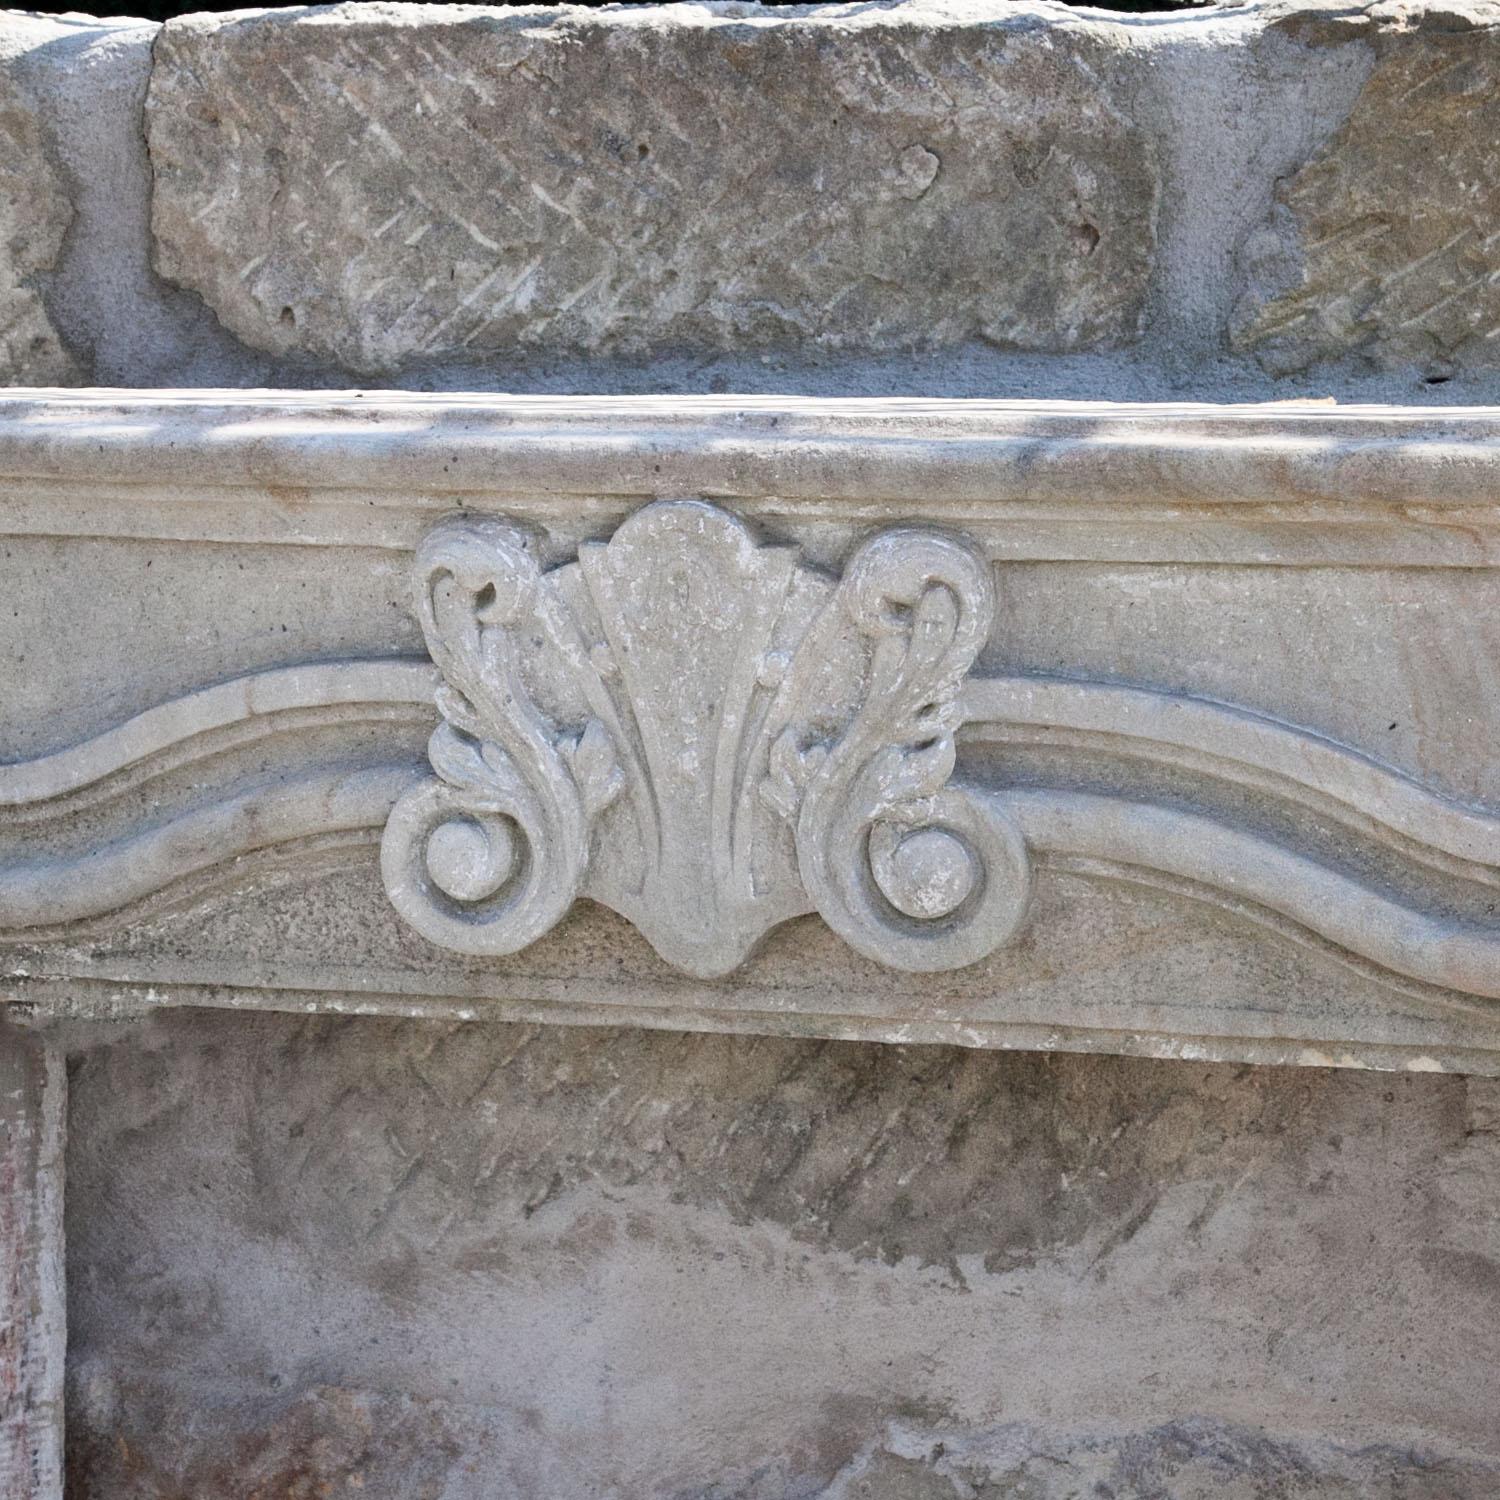 Mantel piece out of sandstone with a rocaille ornament on top and profiled, slanted sides. The mantel comes from a Saxonian castle.